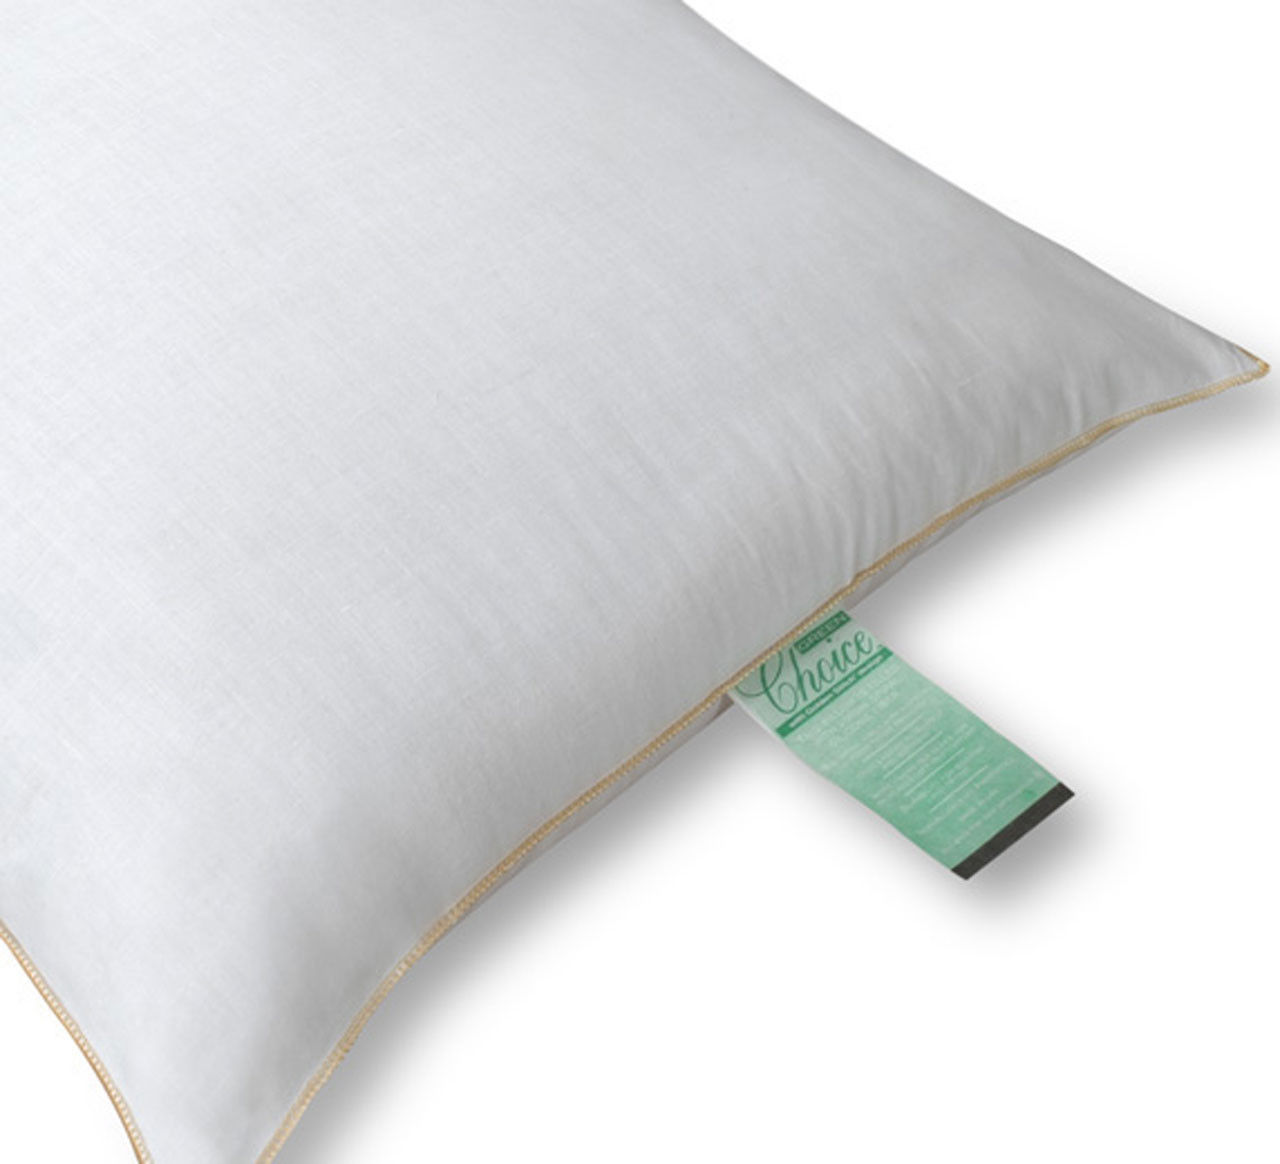 What is the design of the exterior of Green Choice Pillows like?